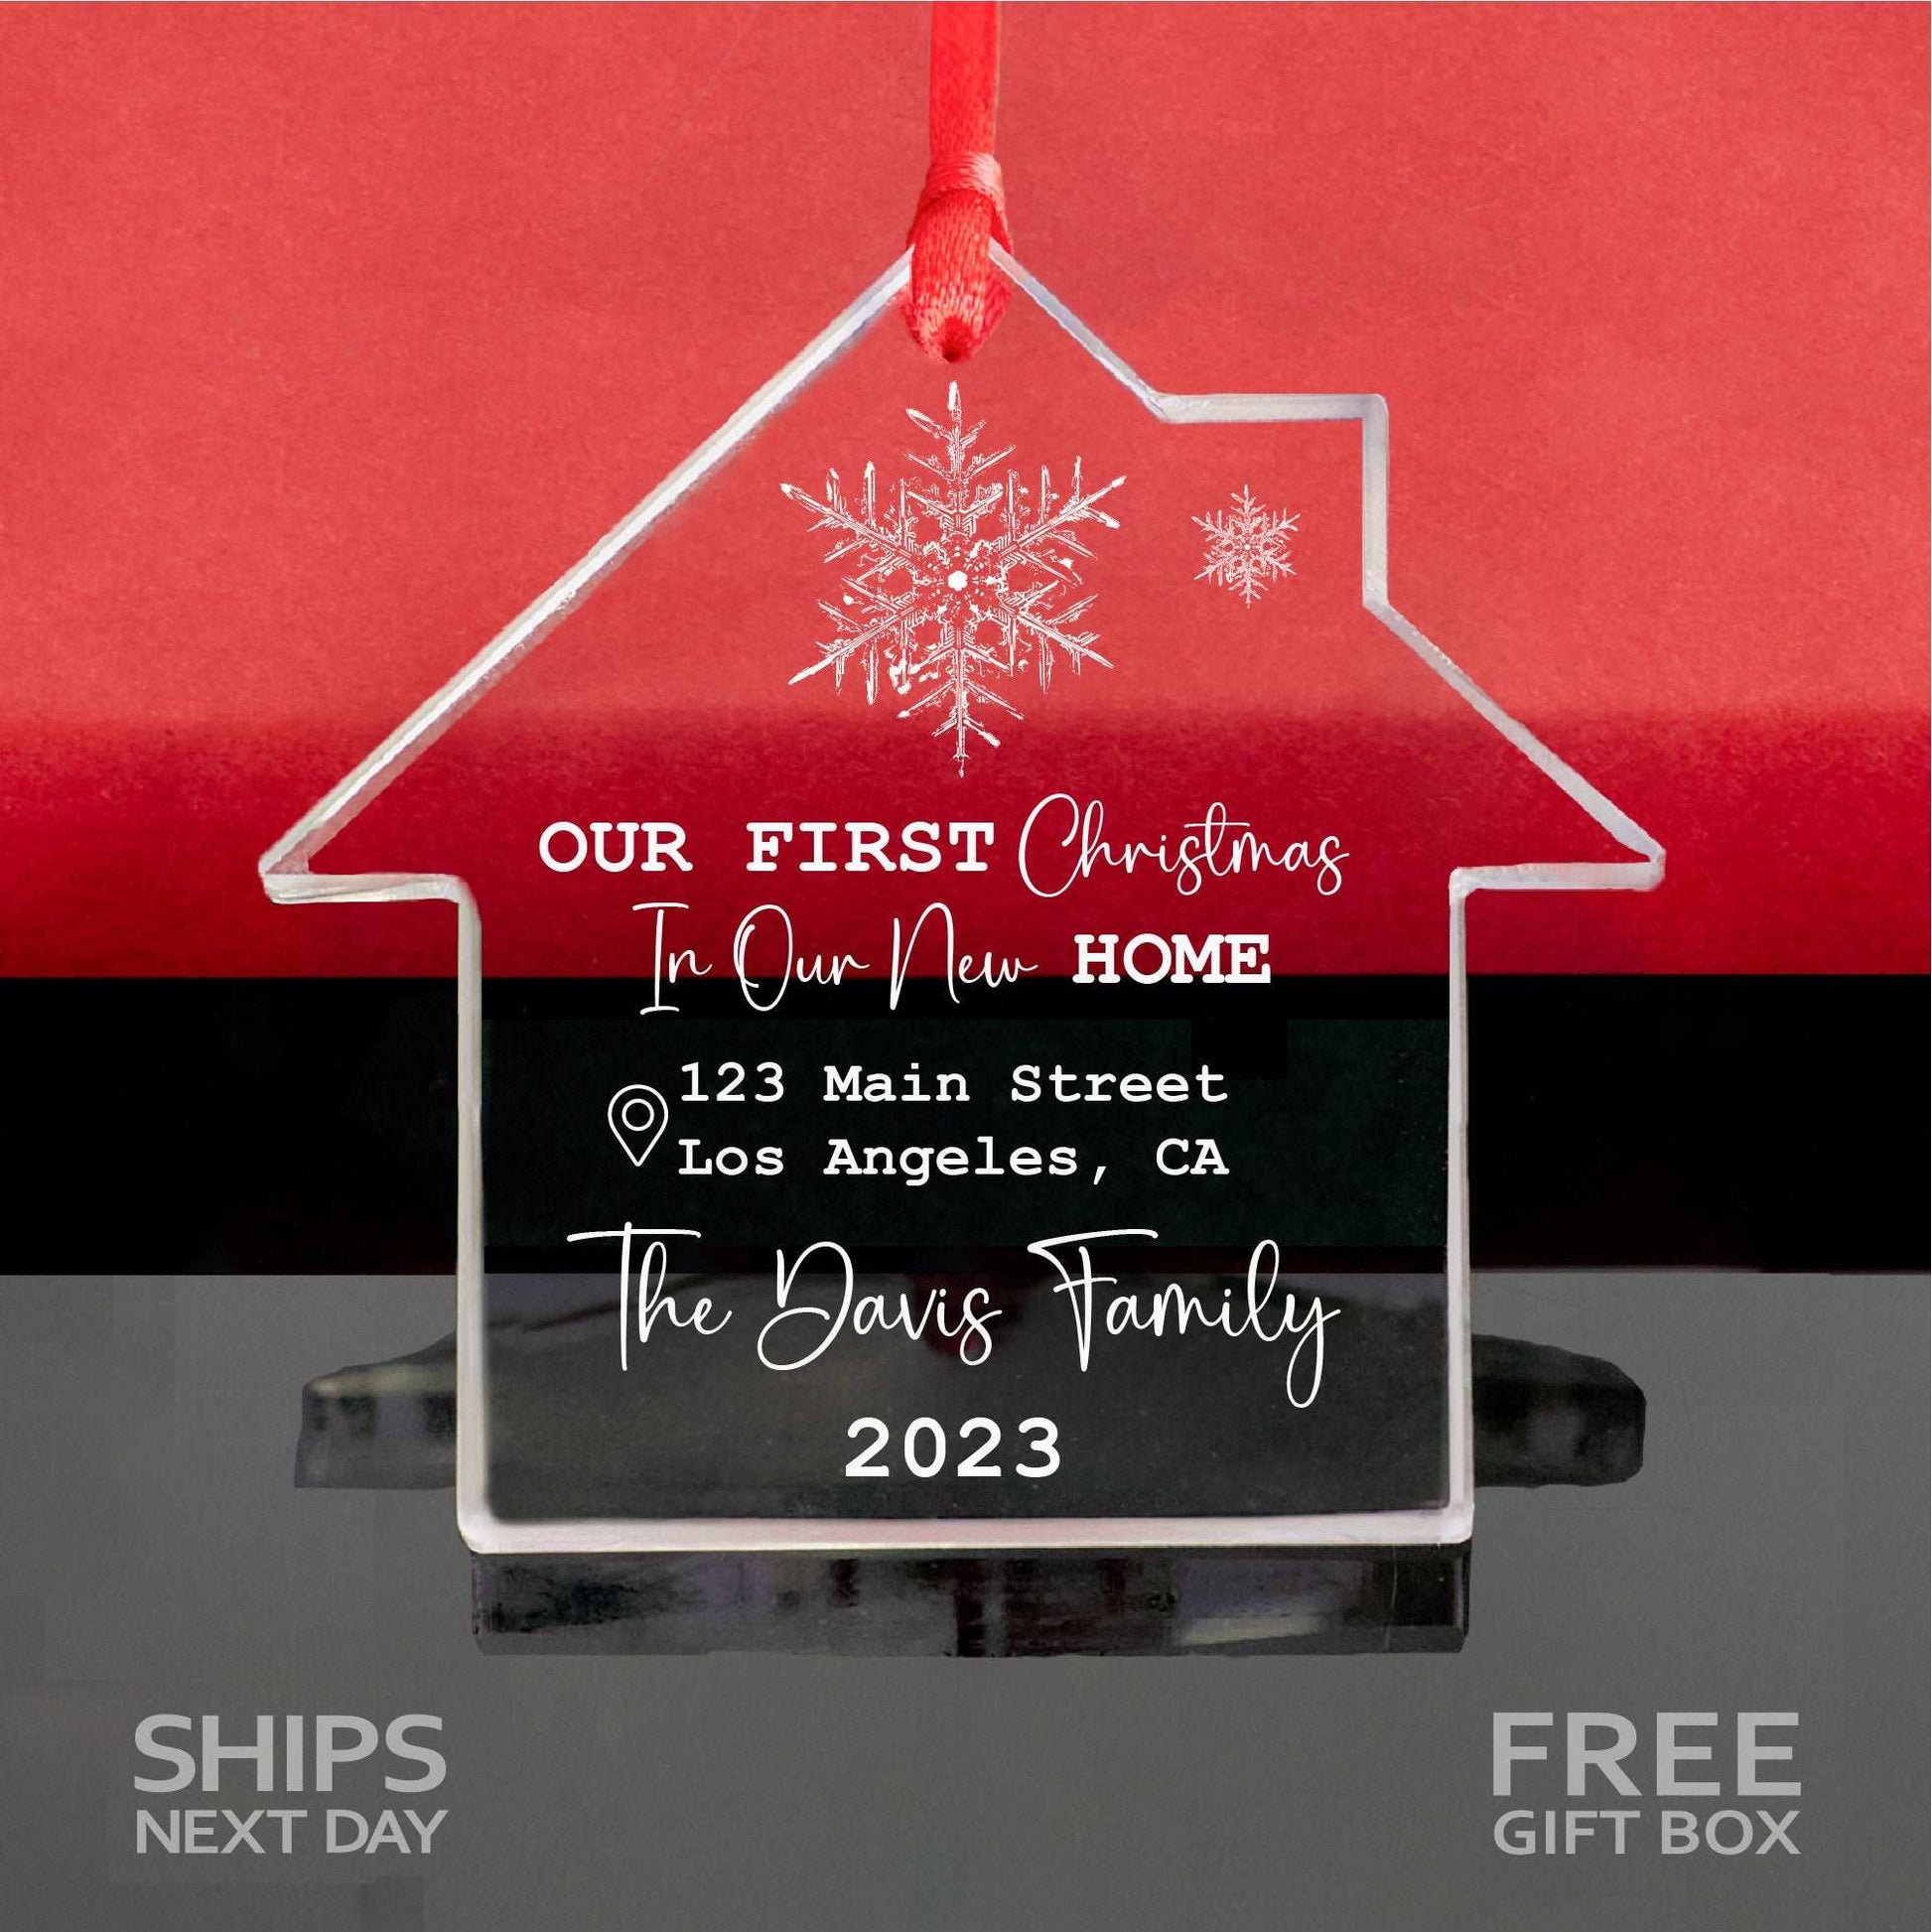 Personalized New Home Glass Ornament • Our First Christmas in New Home Ornament • Snowflake New Home Ornament 